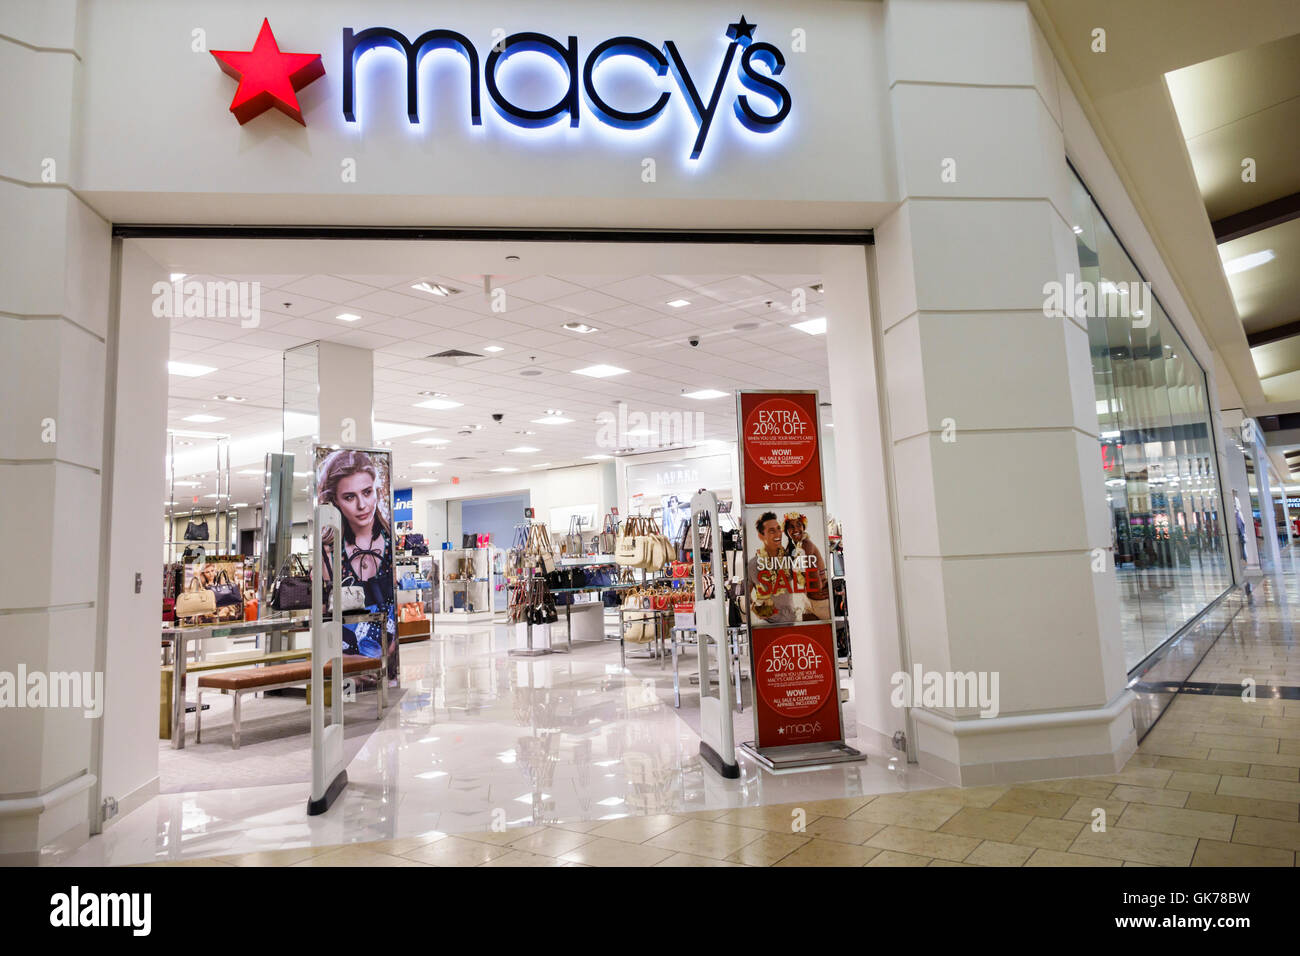 American Department Store Chain Stock Photos & American Department Store Chain Stock Images - Alamy